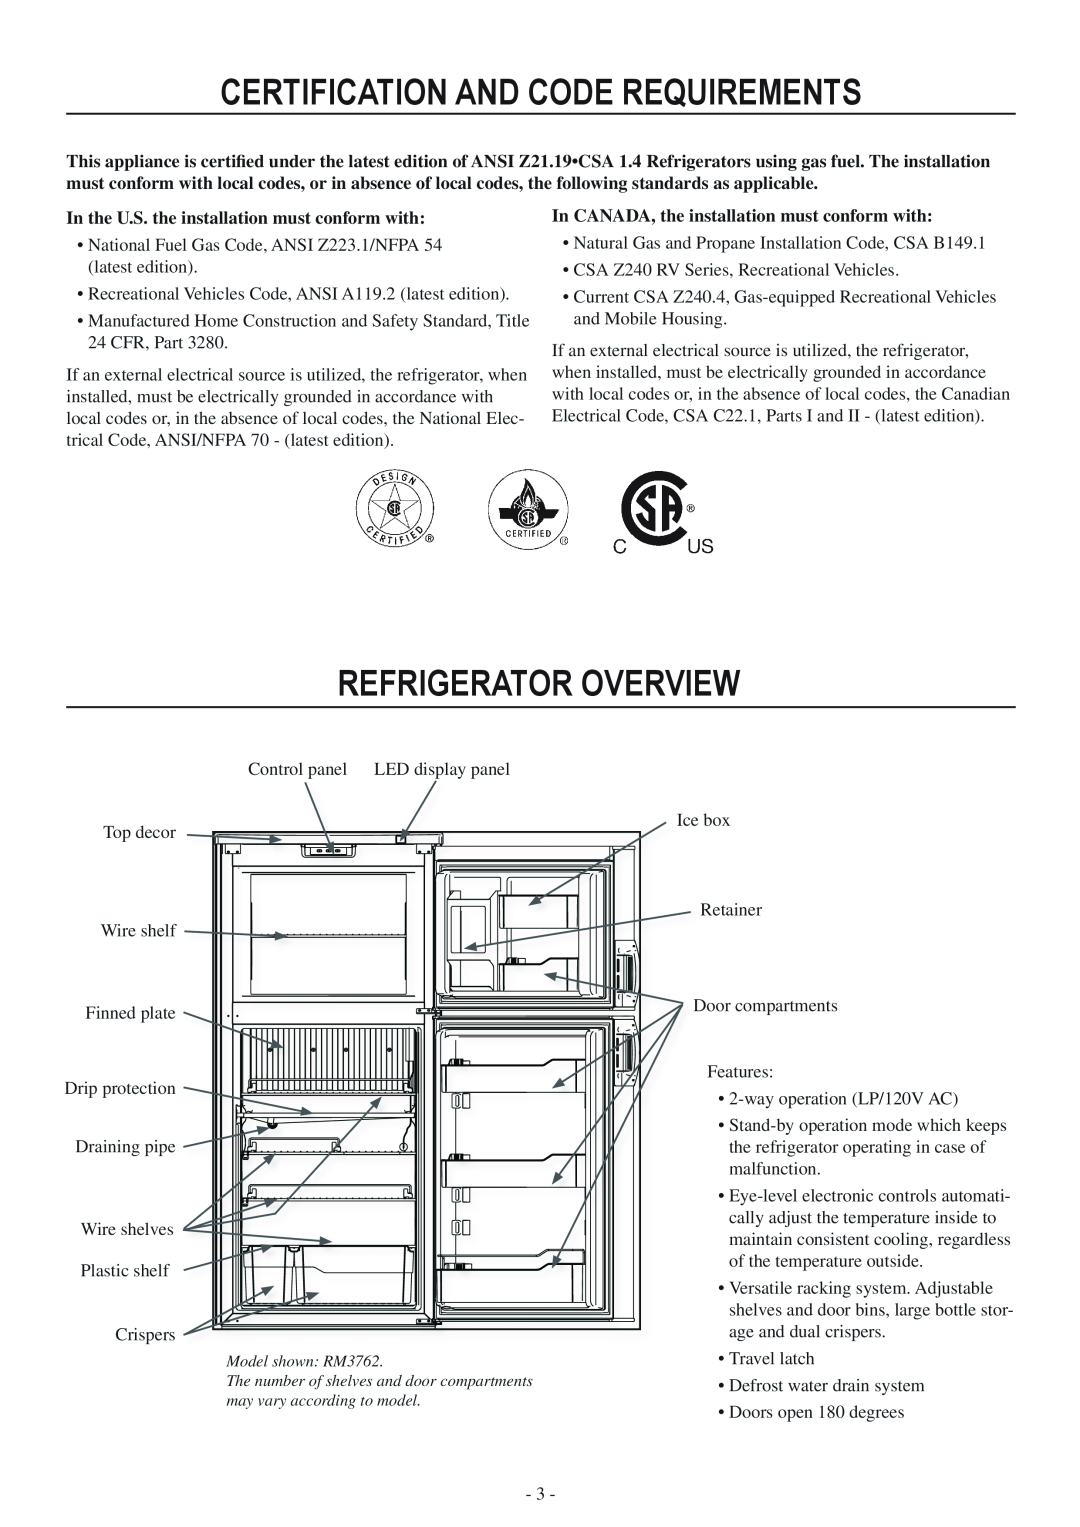 Dometic RM3962 Certification and Code Requirements, refrigerator overview, In the U.S. the installation must conform with 